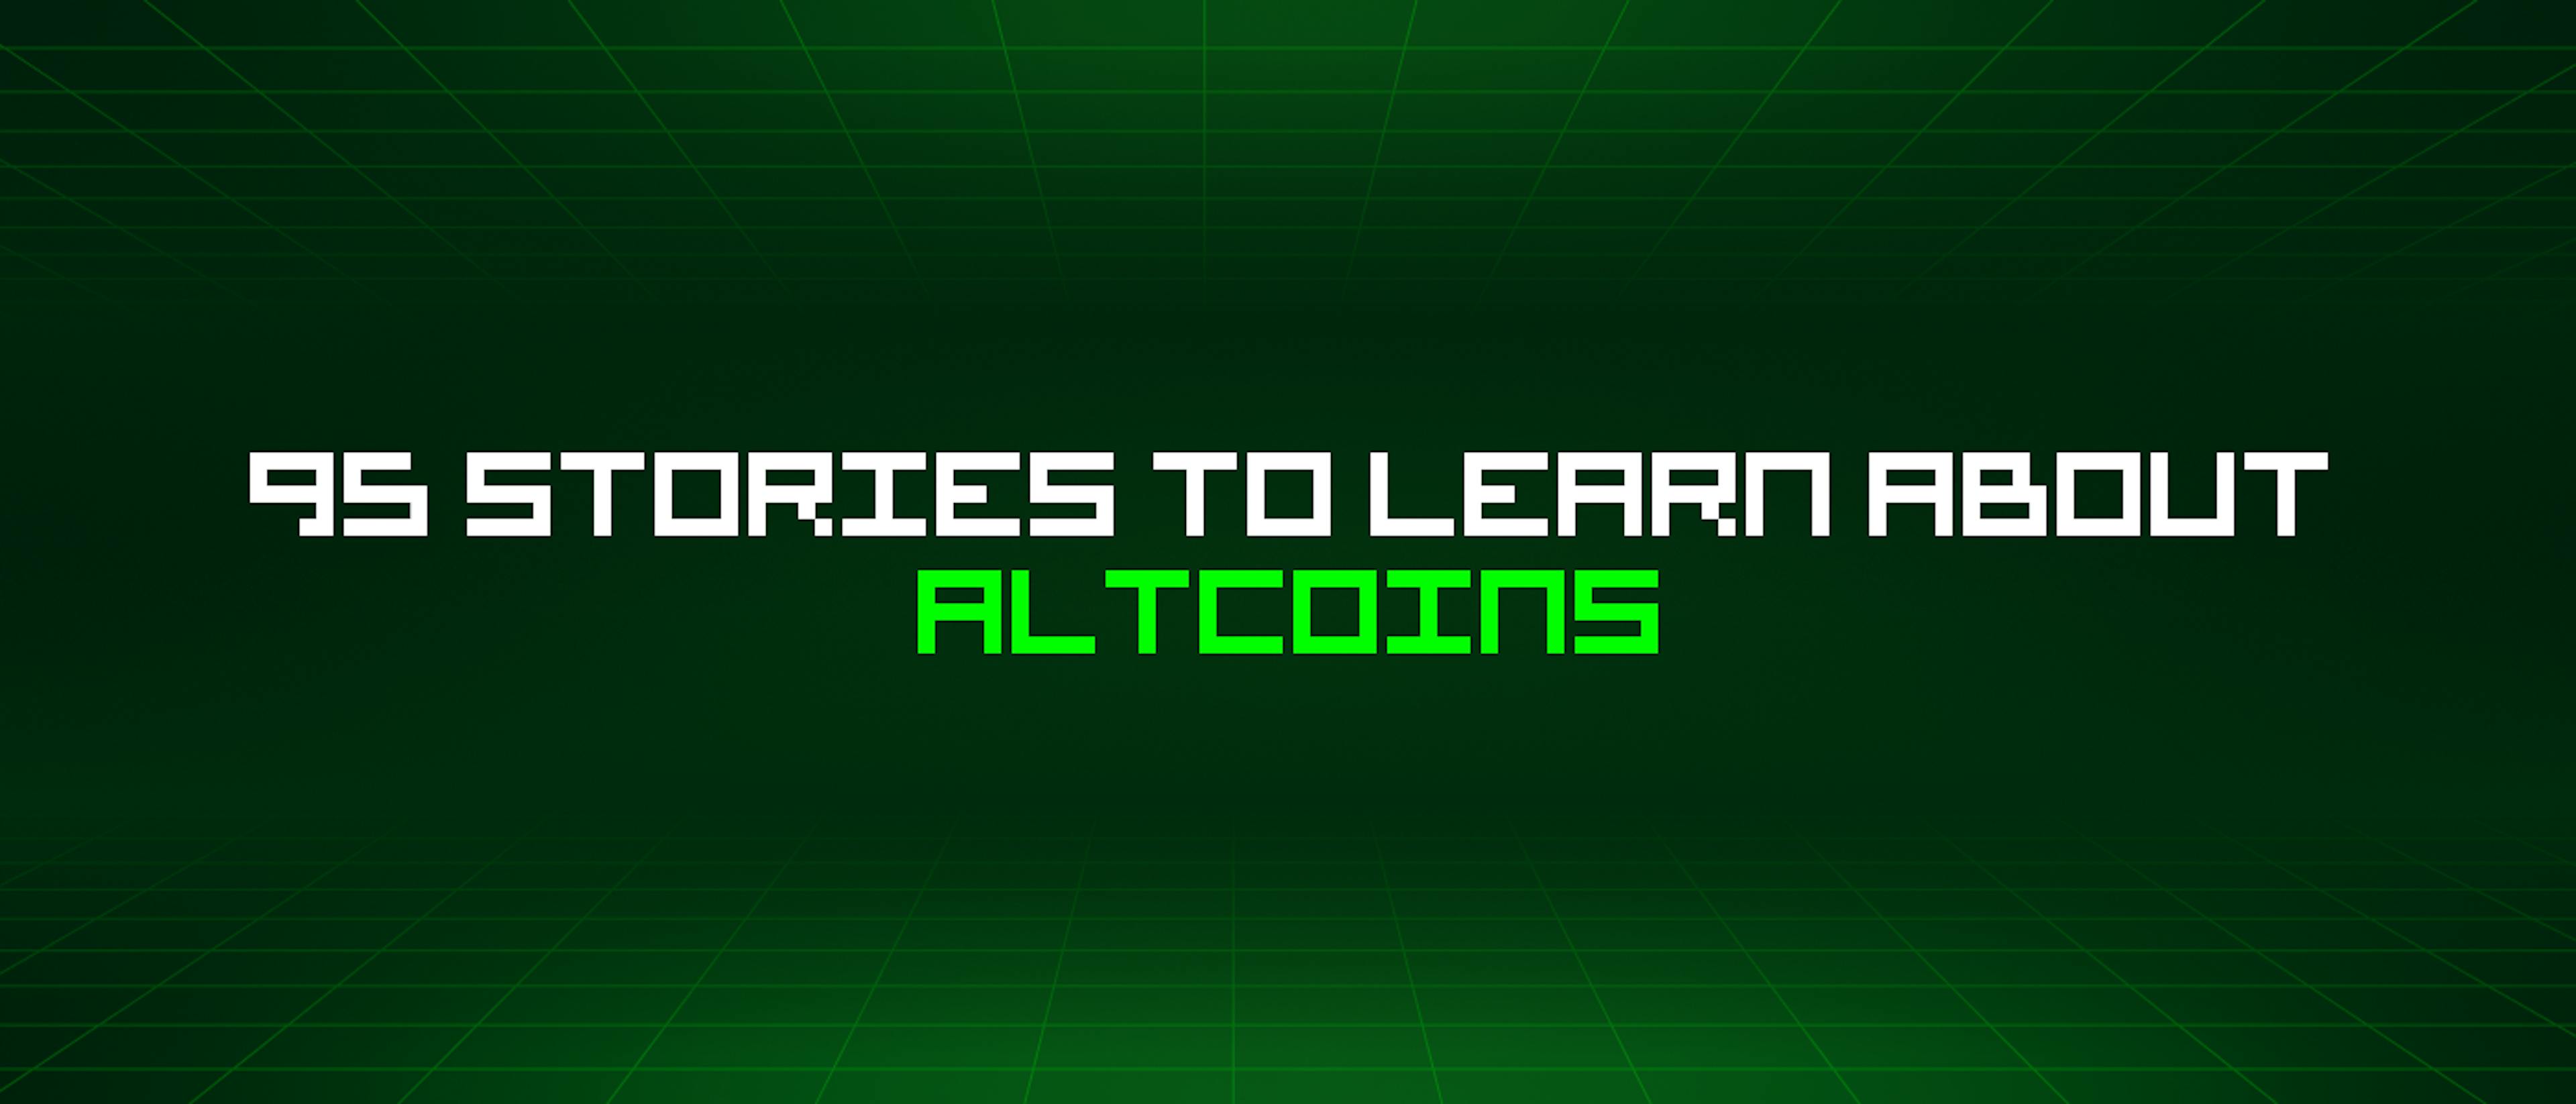 featured image - 95 Stories To Learn About Altcoins